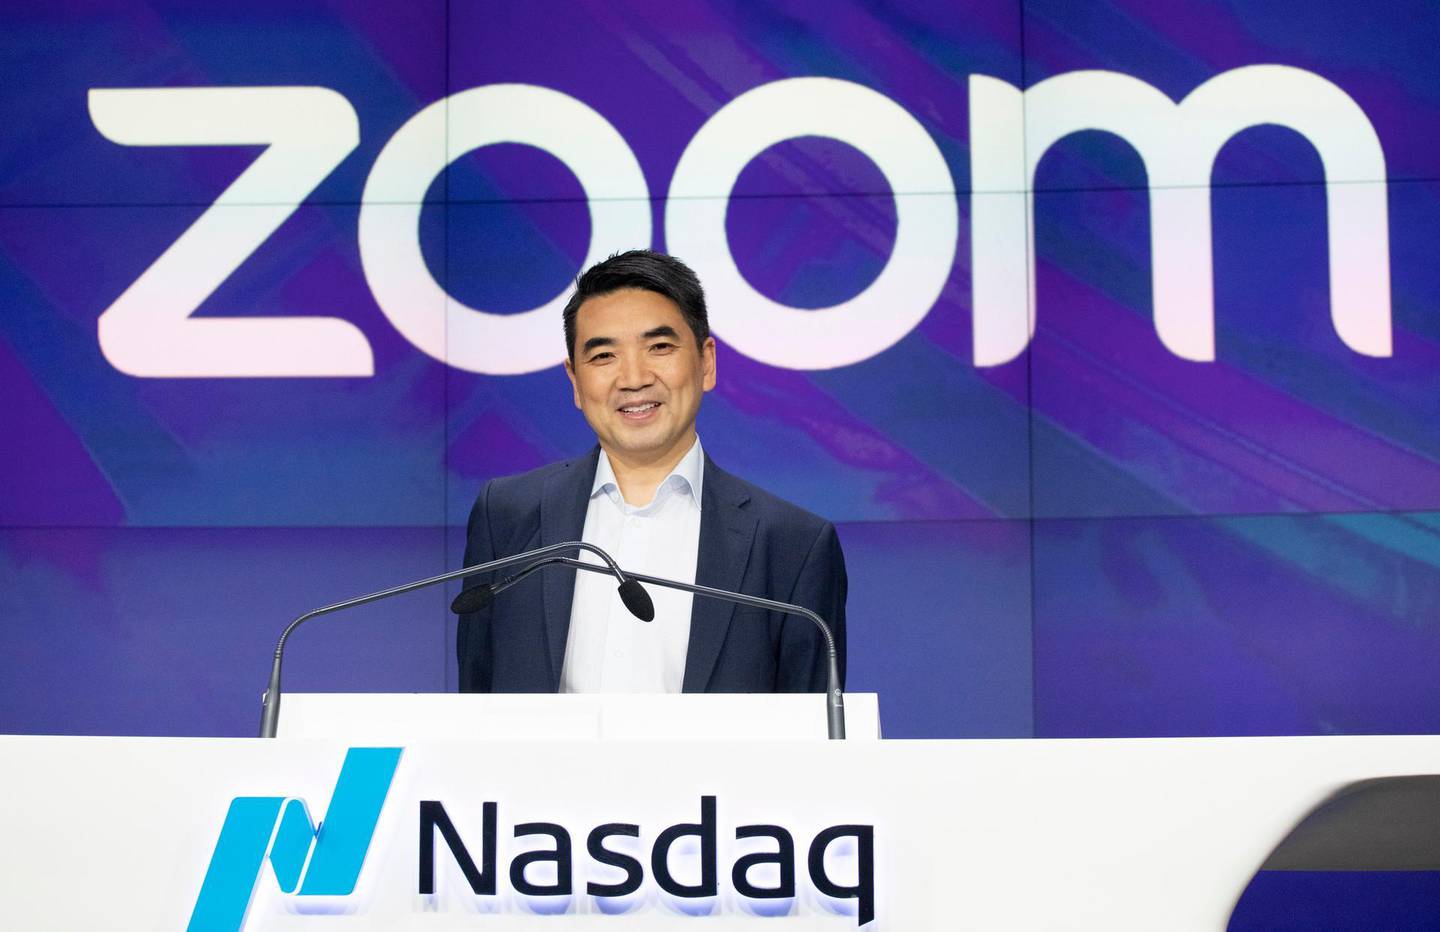 FILE - In this April 18, 2019 file photo, Zoom CEO Eric Yuan attends the opening bell at Nasdaq as his company holds its IPO in New York.  Millions of people are now working from home as part of the intensifying fight against the coronavirus outbreak. Beside relying on Zoom, the video conference service, more frequently as part of their jobs, more people are also tapping it to hold virtual happy hours with friends and family banned from gathering in public places.  (AP Photo/Mark Lennihan, File)